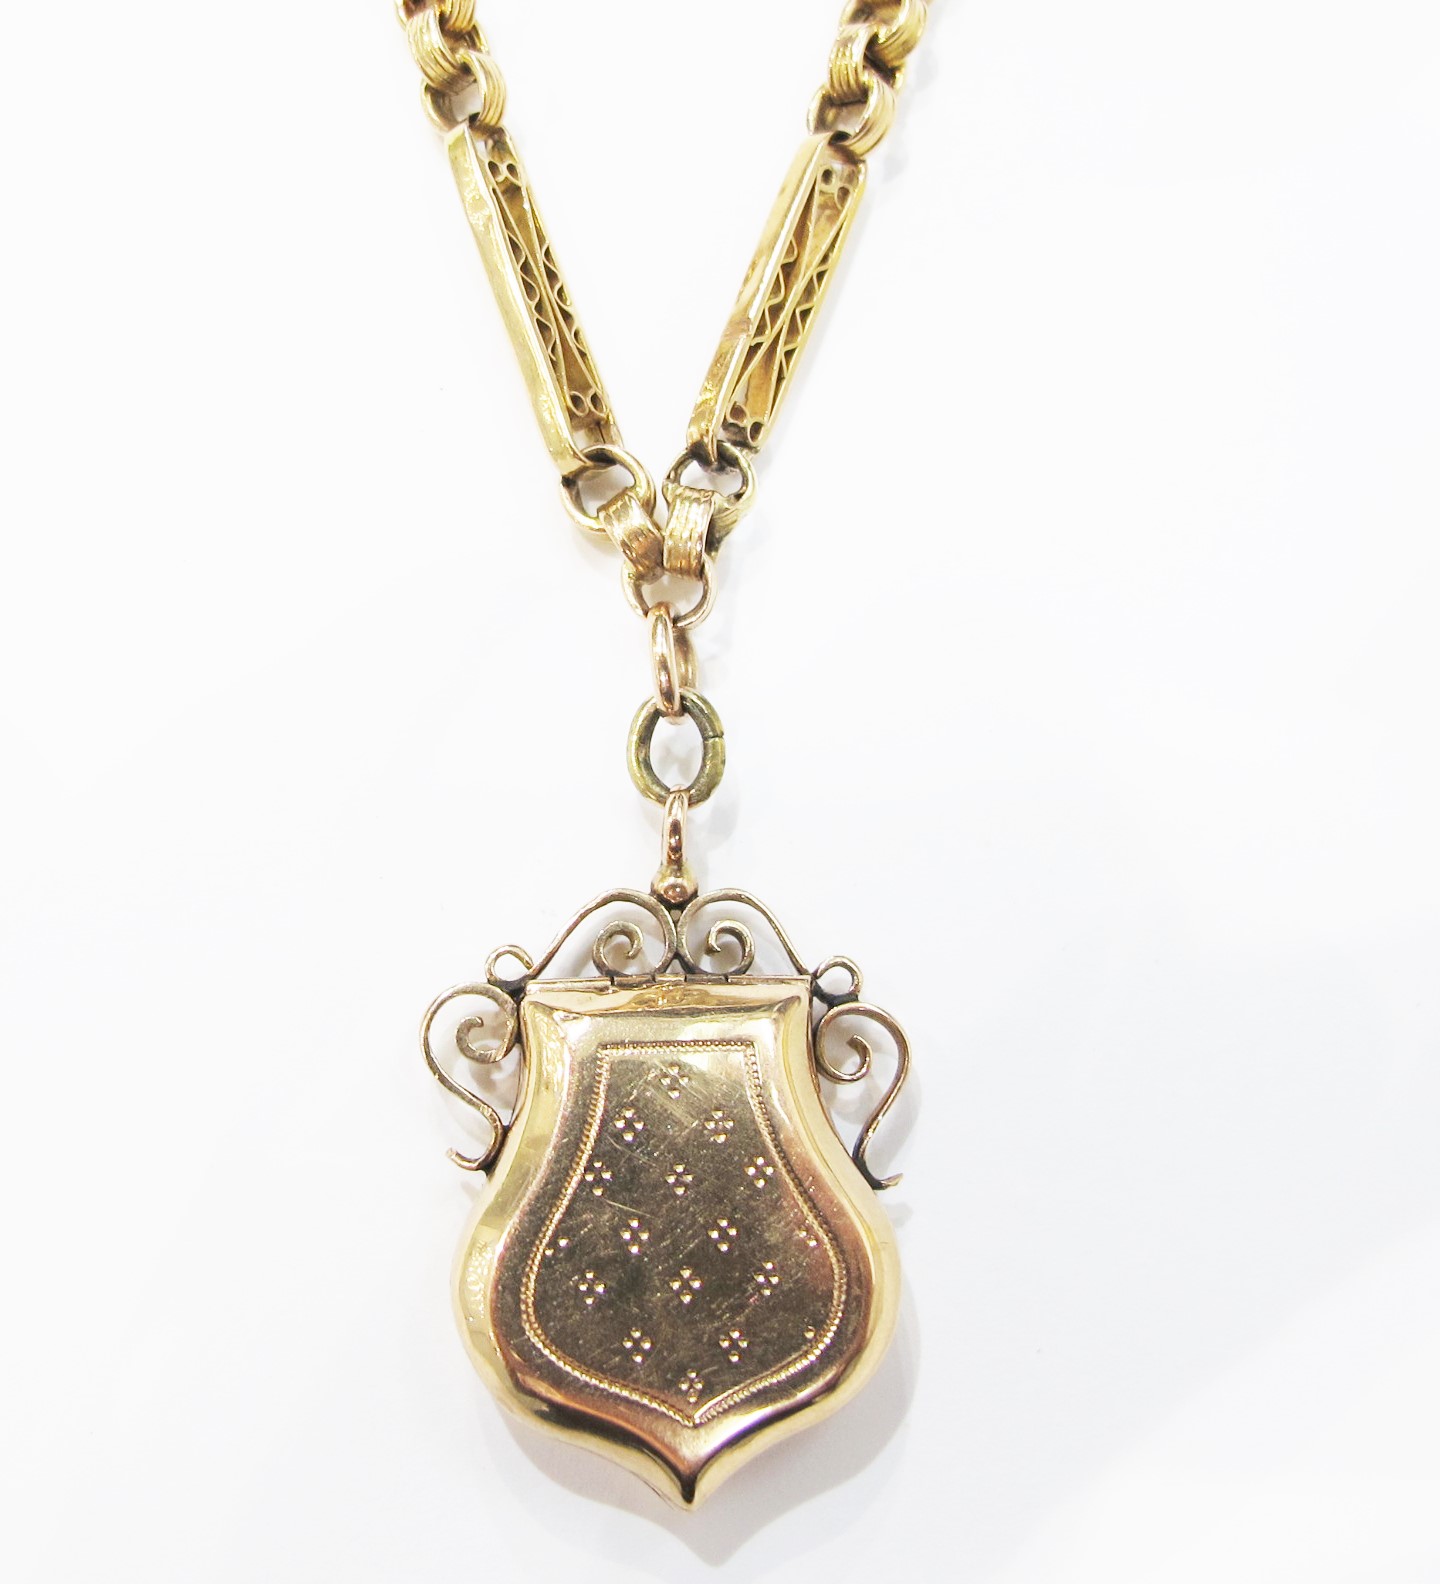 Details about   Vintage French Jewelry Necklace Piece No Chain 